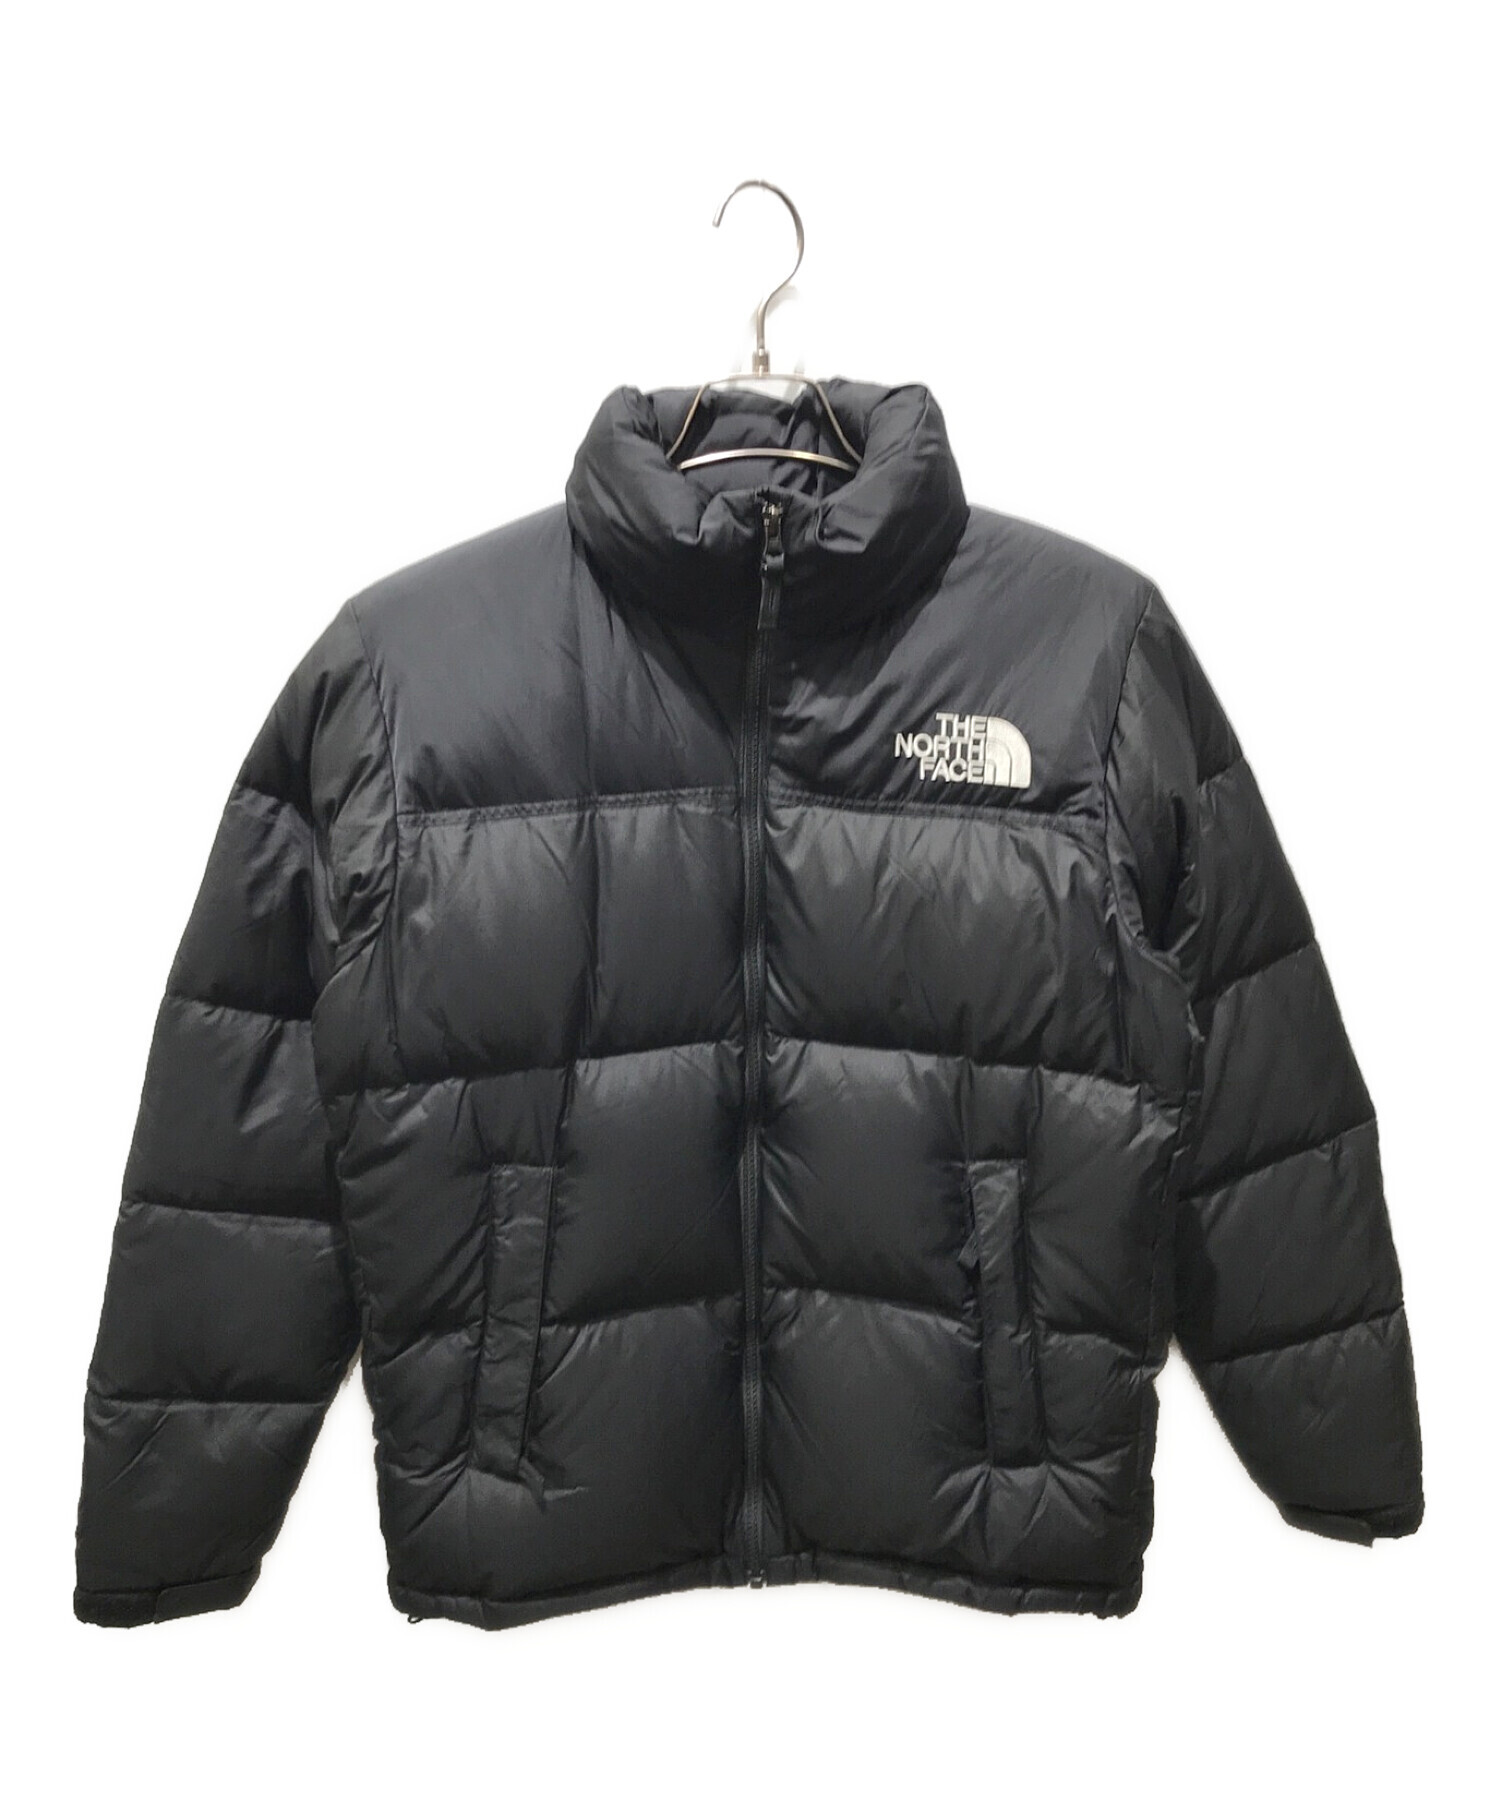 THE NORTH FACE nuptse BLACK M ND91841beauty